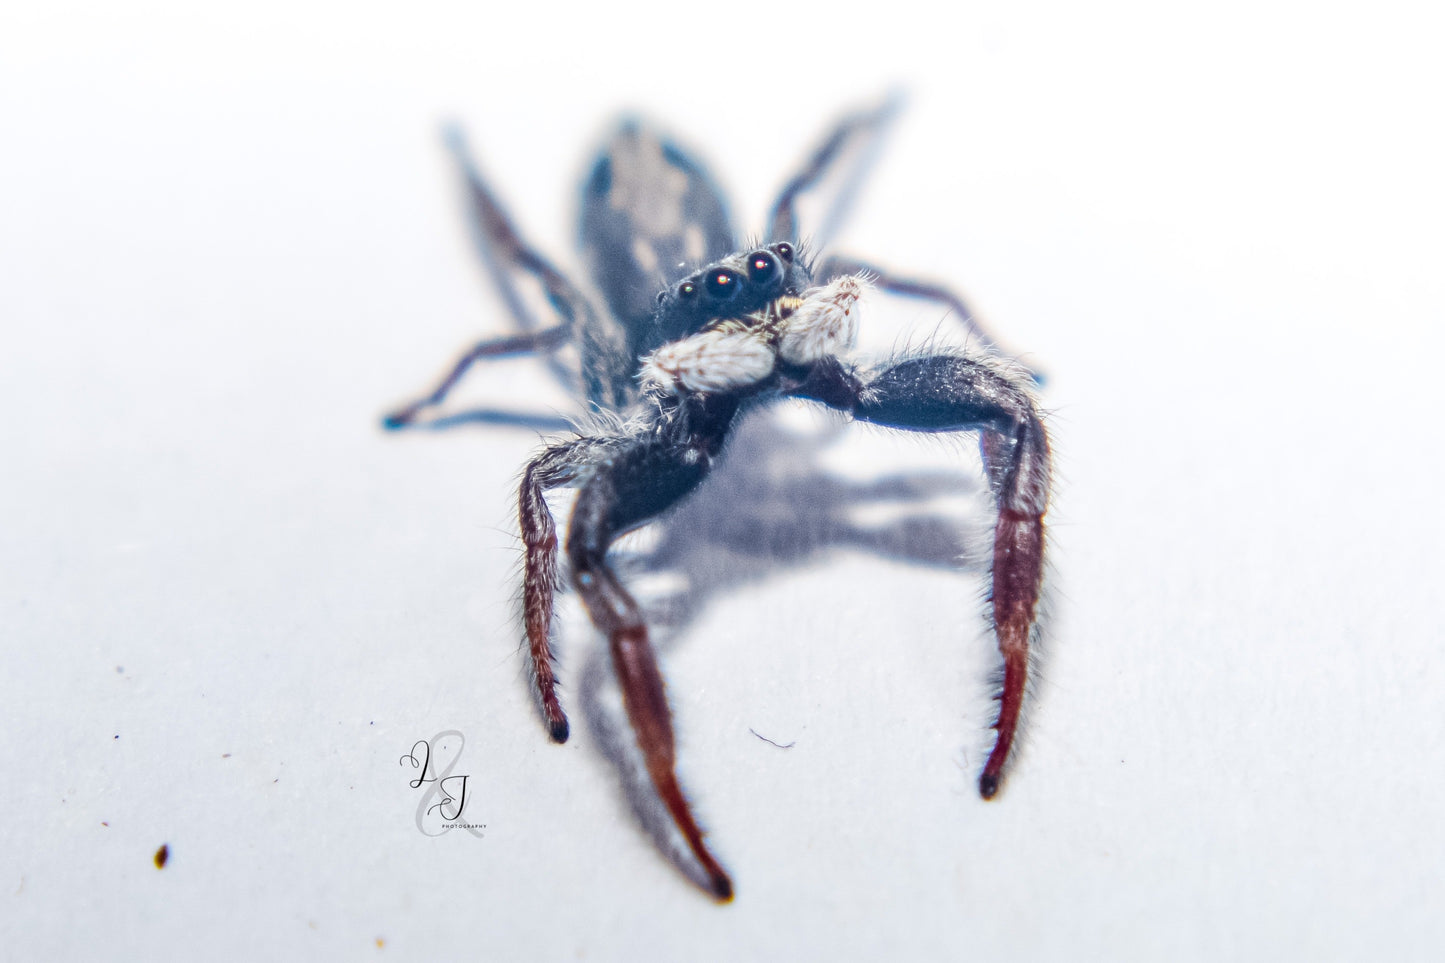 Racing-stripe crevice jumping spider (Ocrisiona leucocomis)